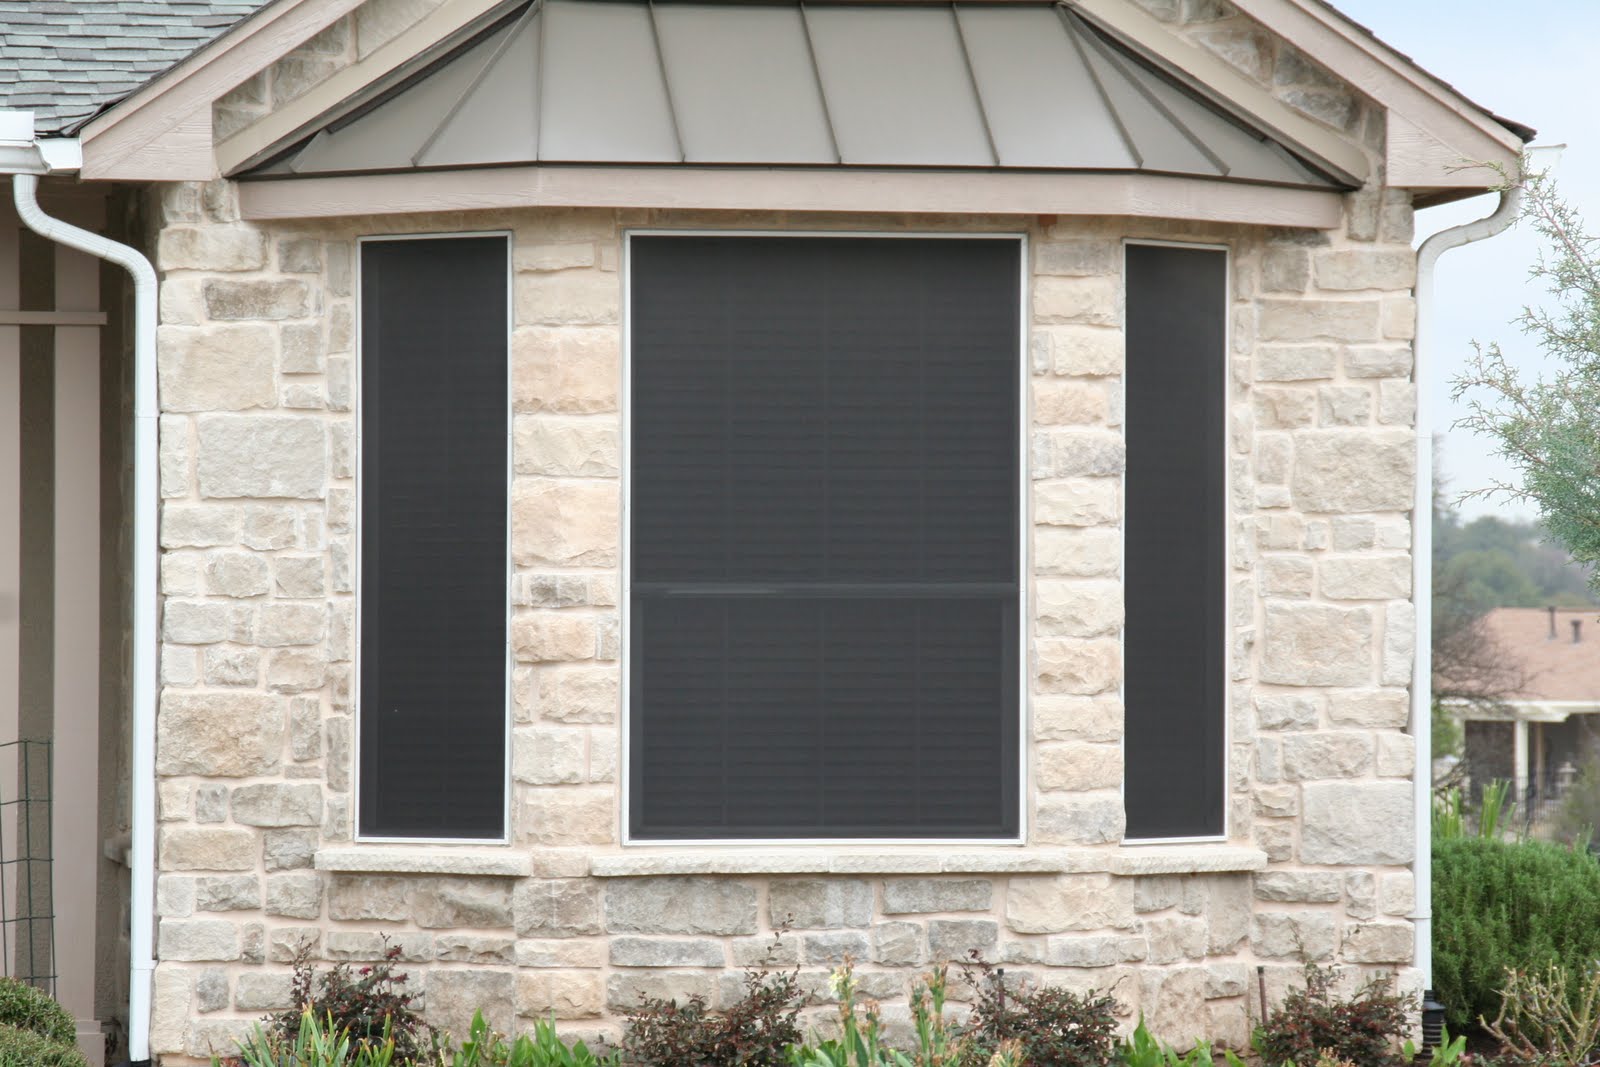  Insulation &amp; Home Performance Contractor: Solar Screens For Windows